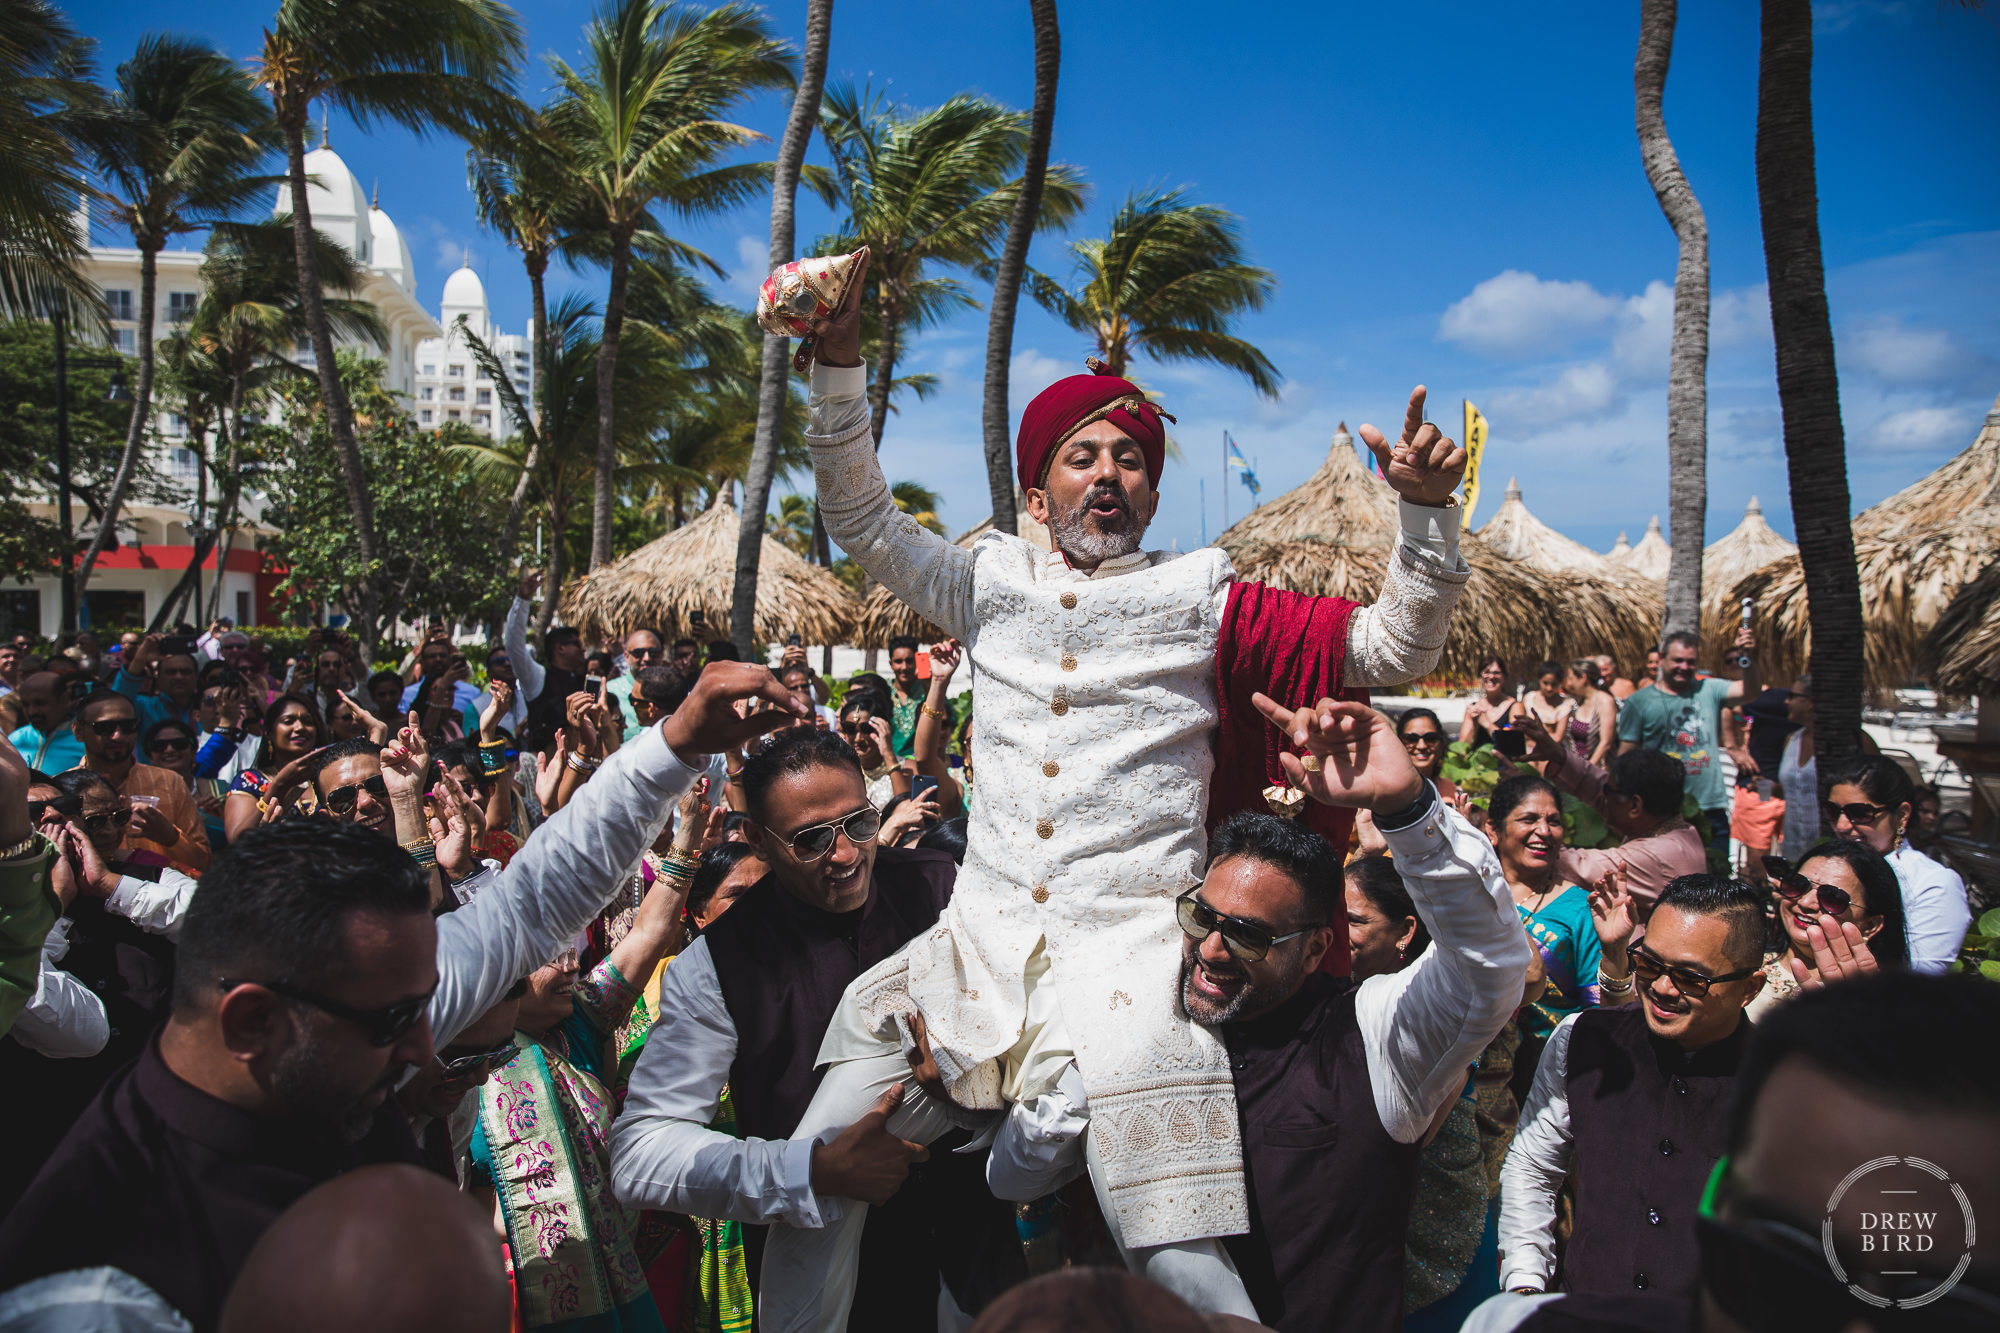 An Indian groom in full Hindu wedding attire is lifted and carried on the shoulders of his friends in a crowded celebratory parade. This is part of the baraat ceremony as the groom and his friends travel to the Indian wedding ceremony site on the beach at the Hilton Aruba resort in the Caribbean by SF Photographer Drew Bird. This is a gorgeous documentary style wedding photo of an Indian wedding ceremony.